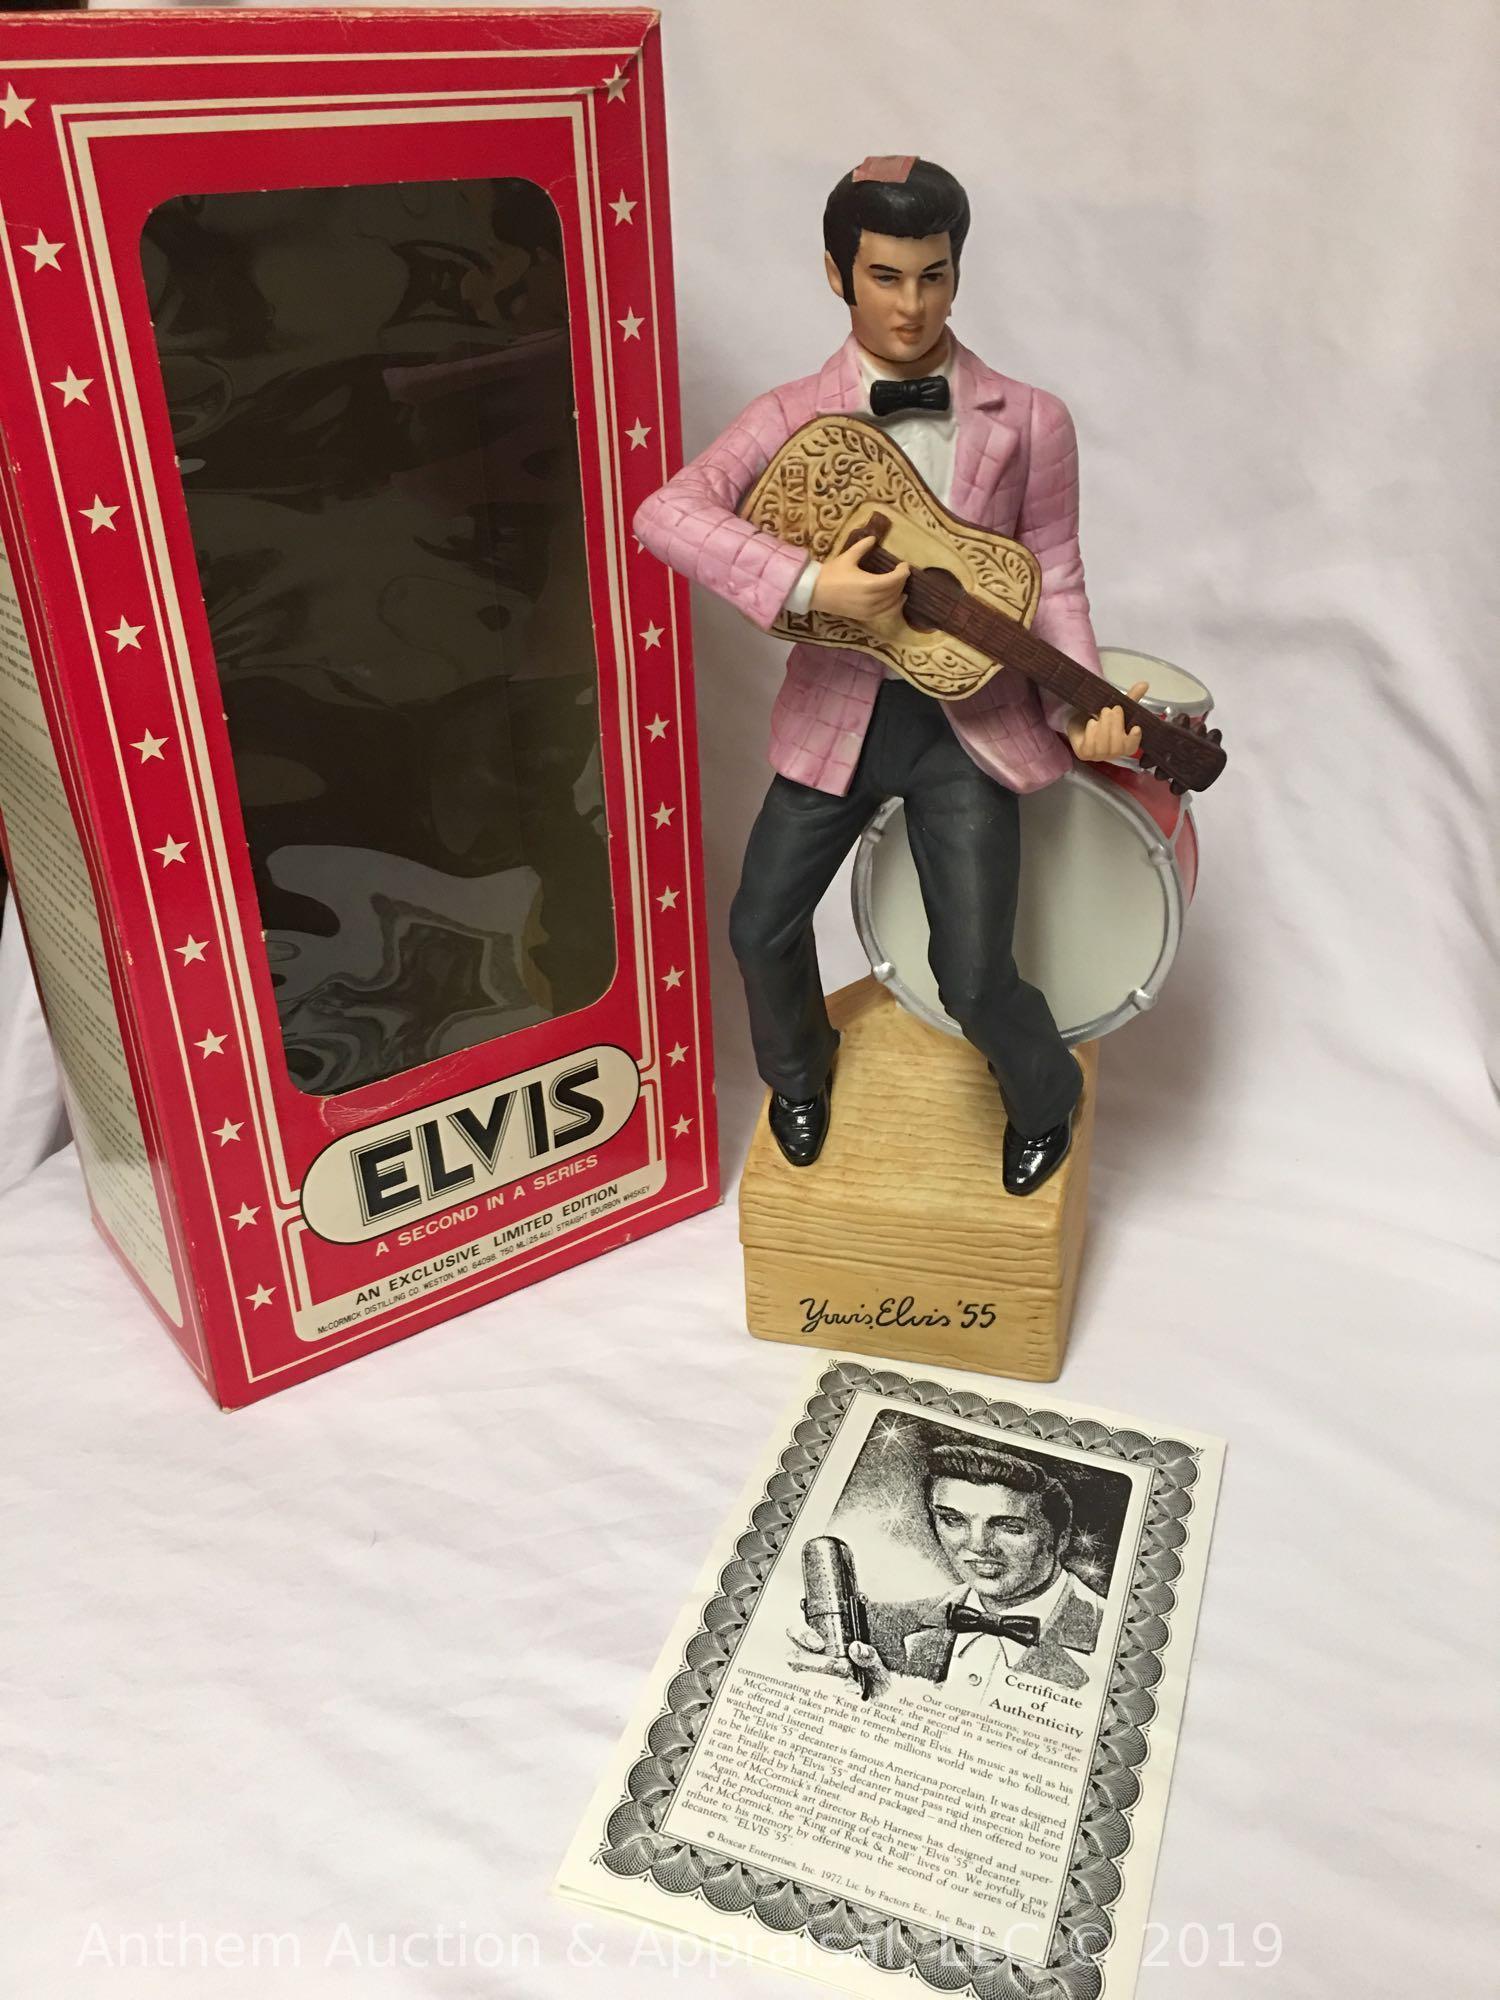 RARE!! American porcelain by McCormick Elvis Presley Limited Edition decanter "Yours, Elvis '55"